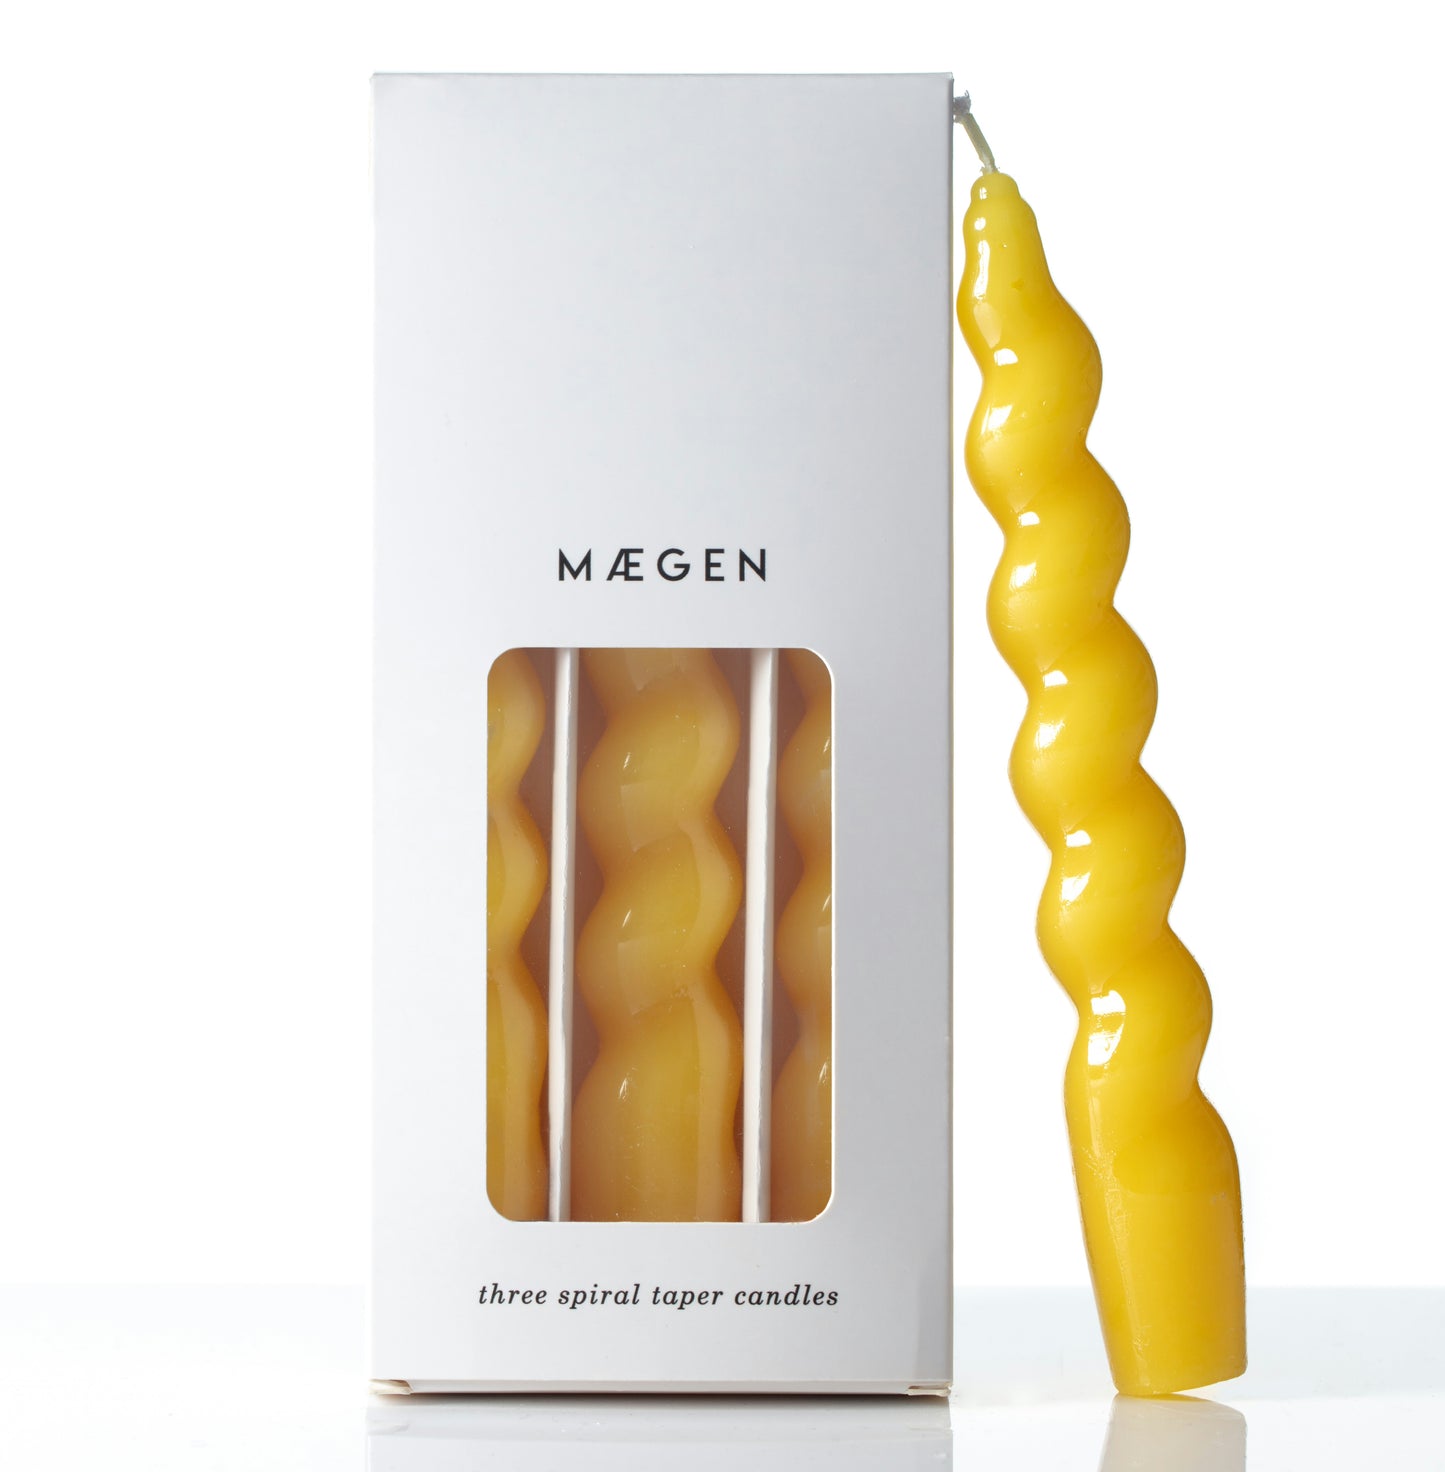 Maegen Yellow Spiral Tapered Candles